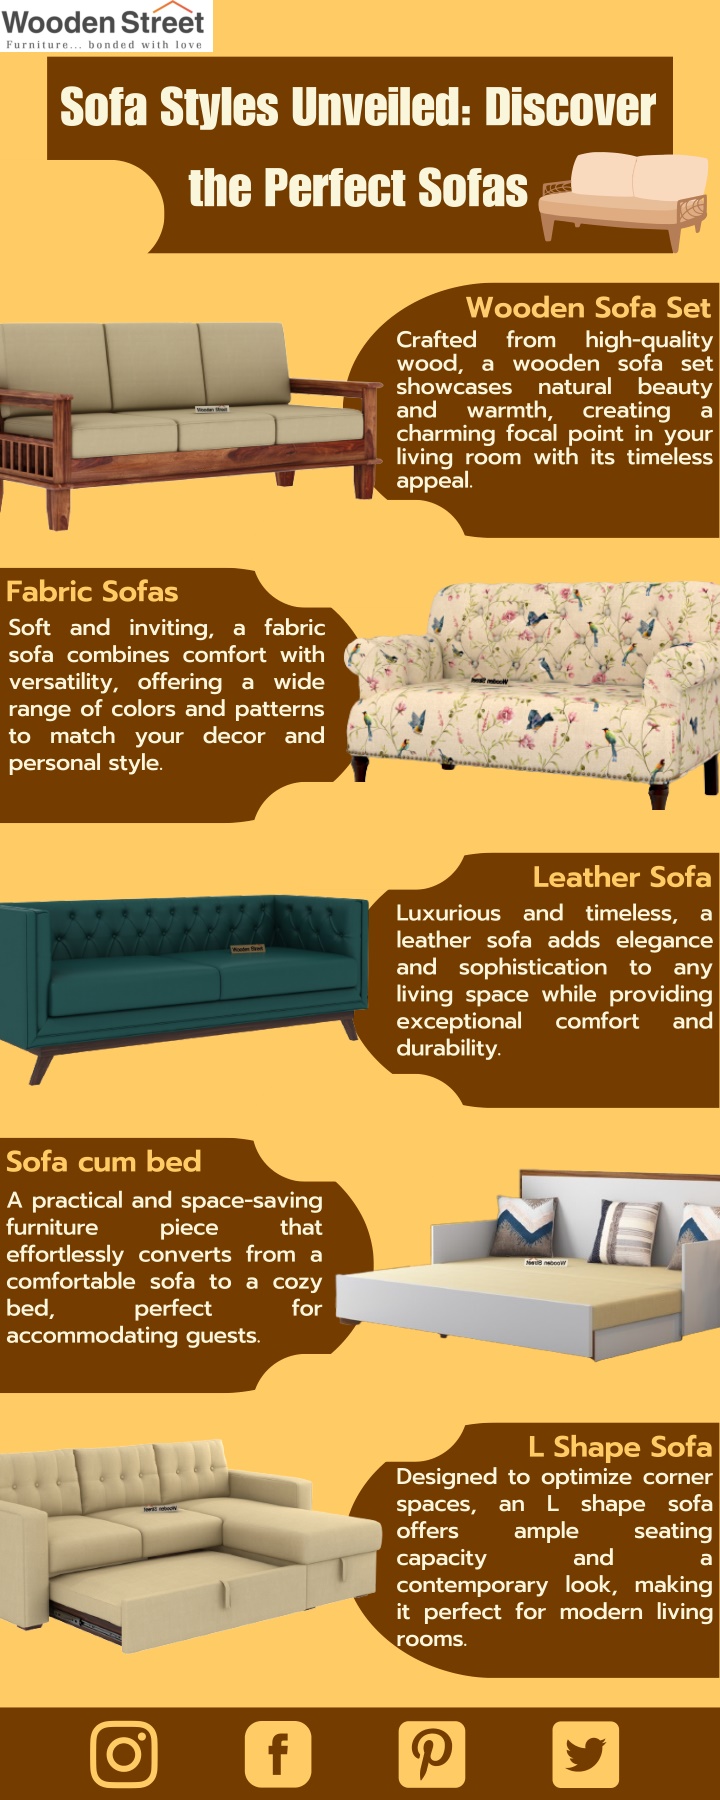 sofa styles unveiled discover